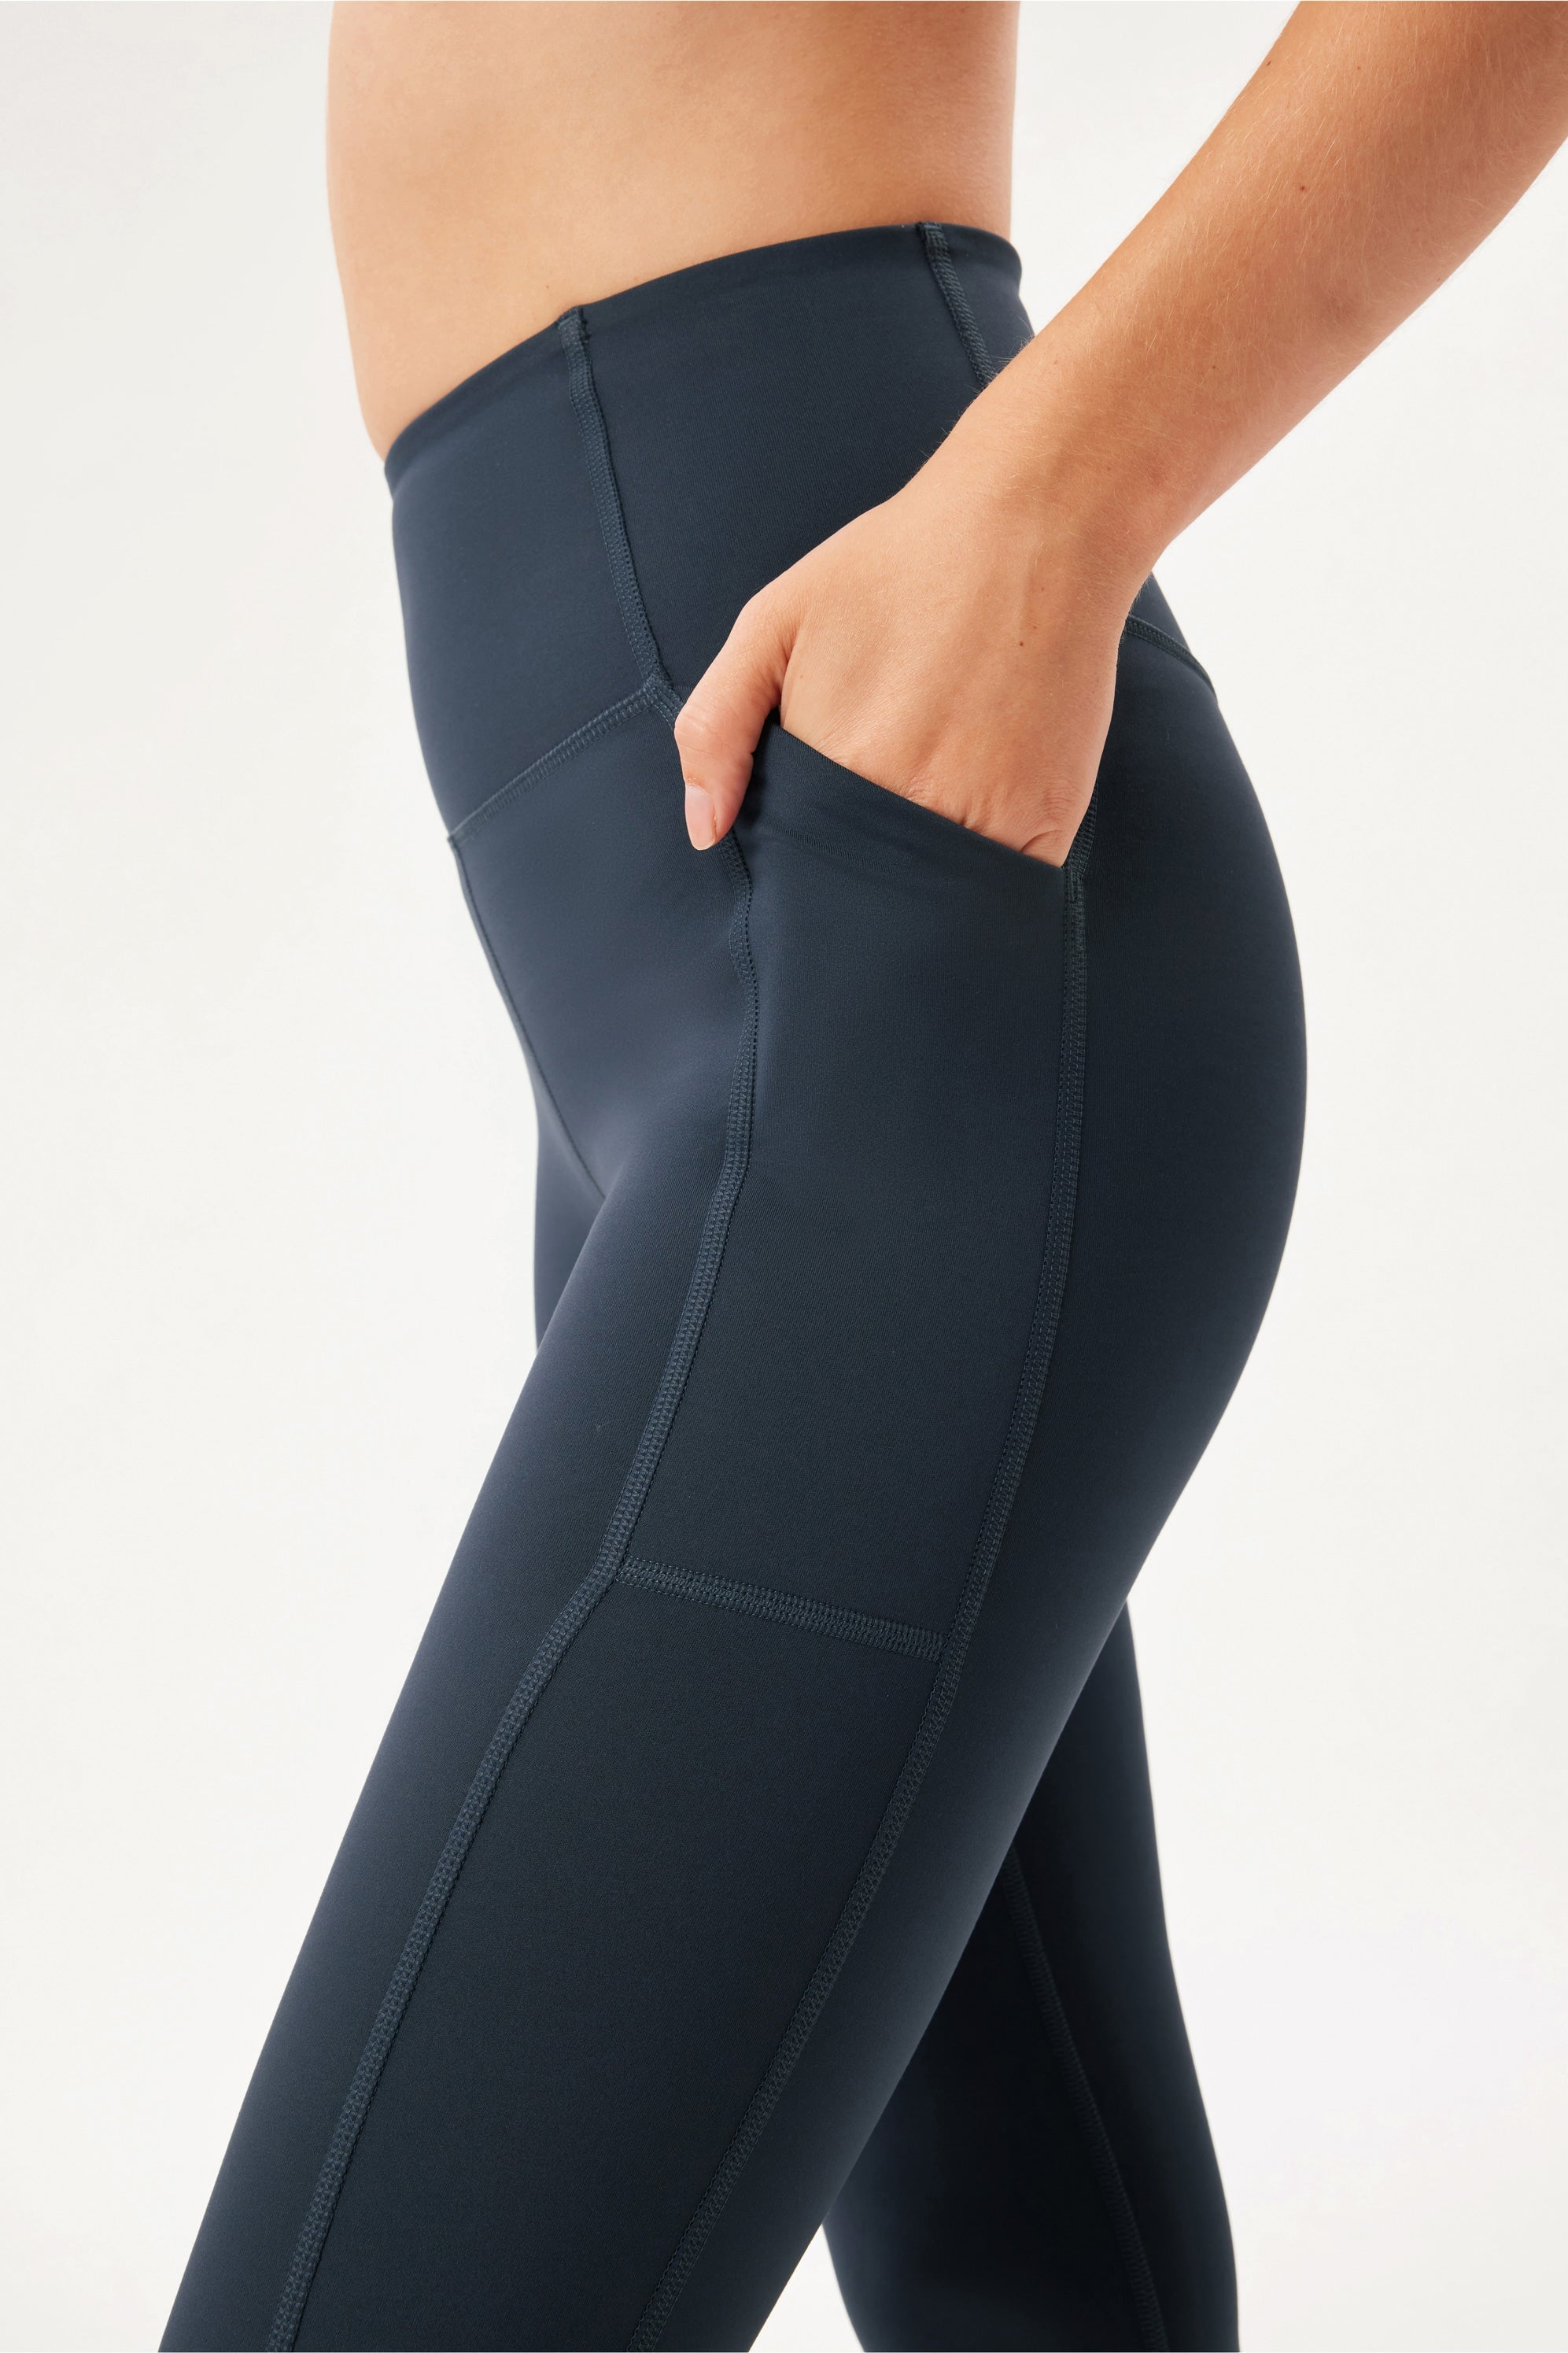 20 Best Leggings with Pockets in 2023 - Athleisure for Women